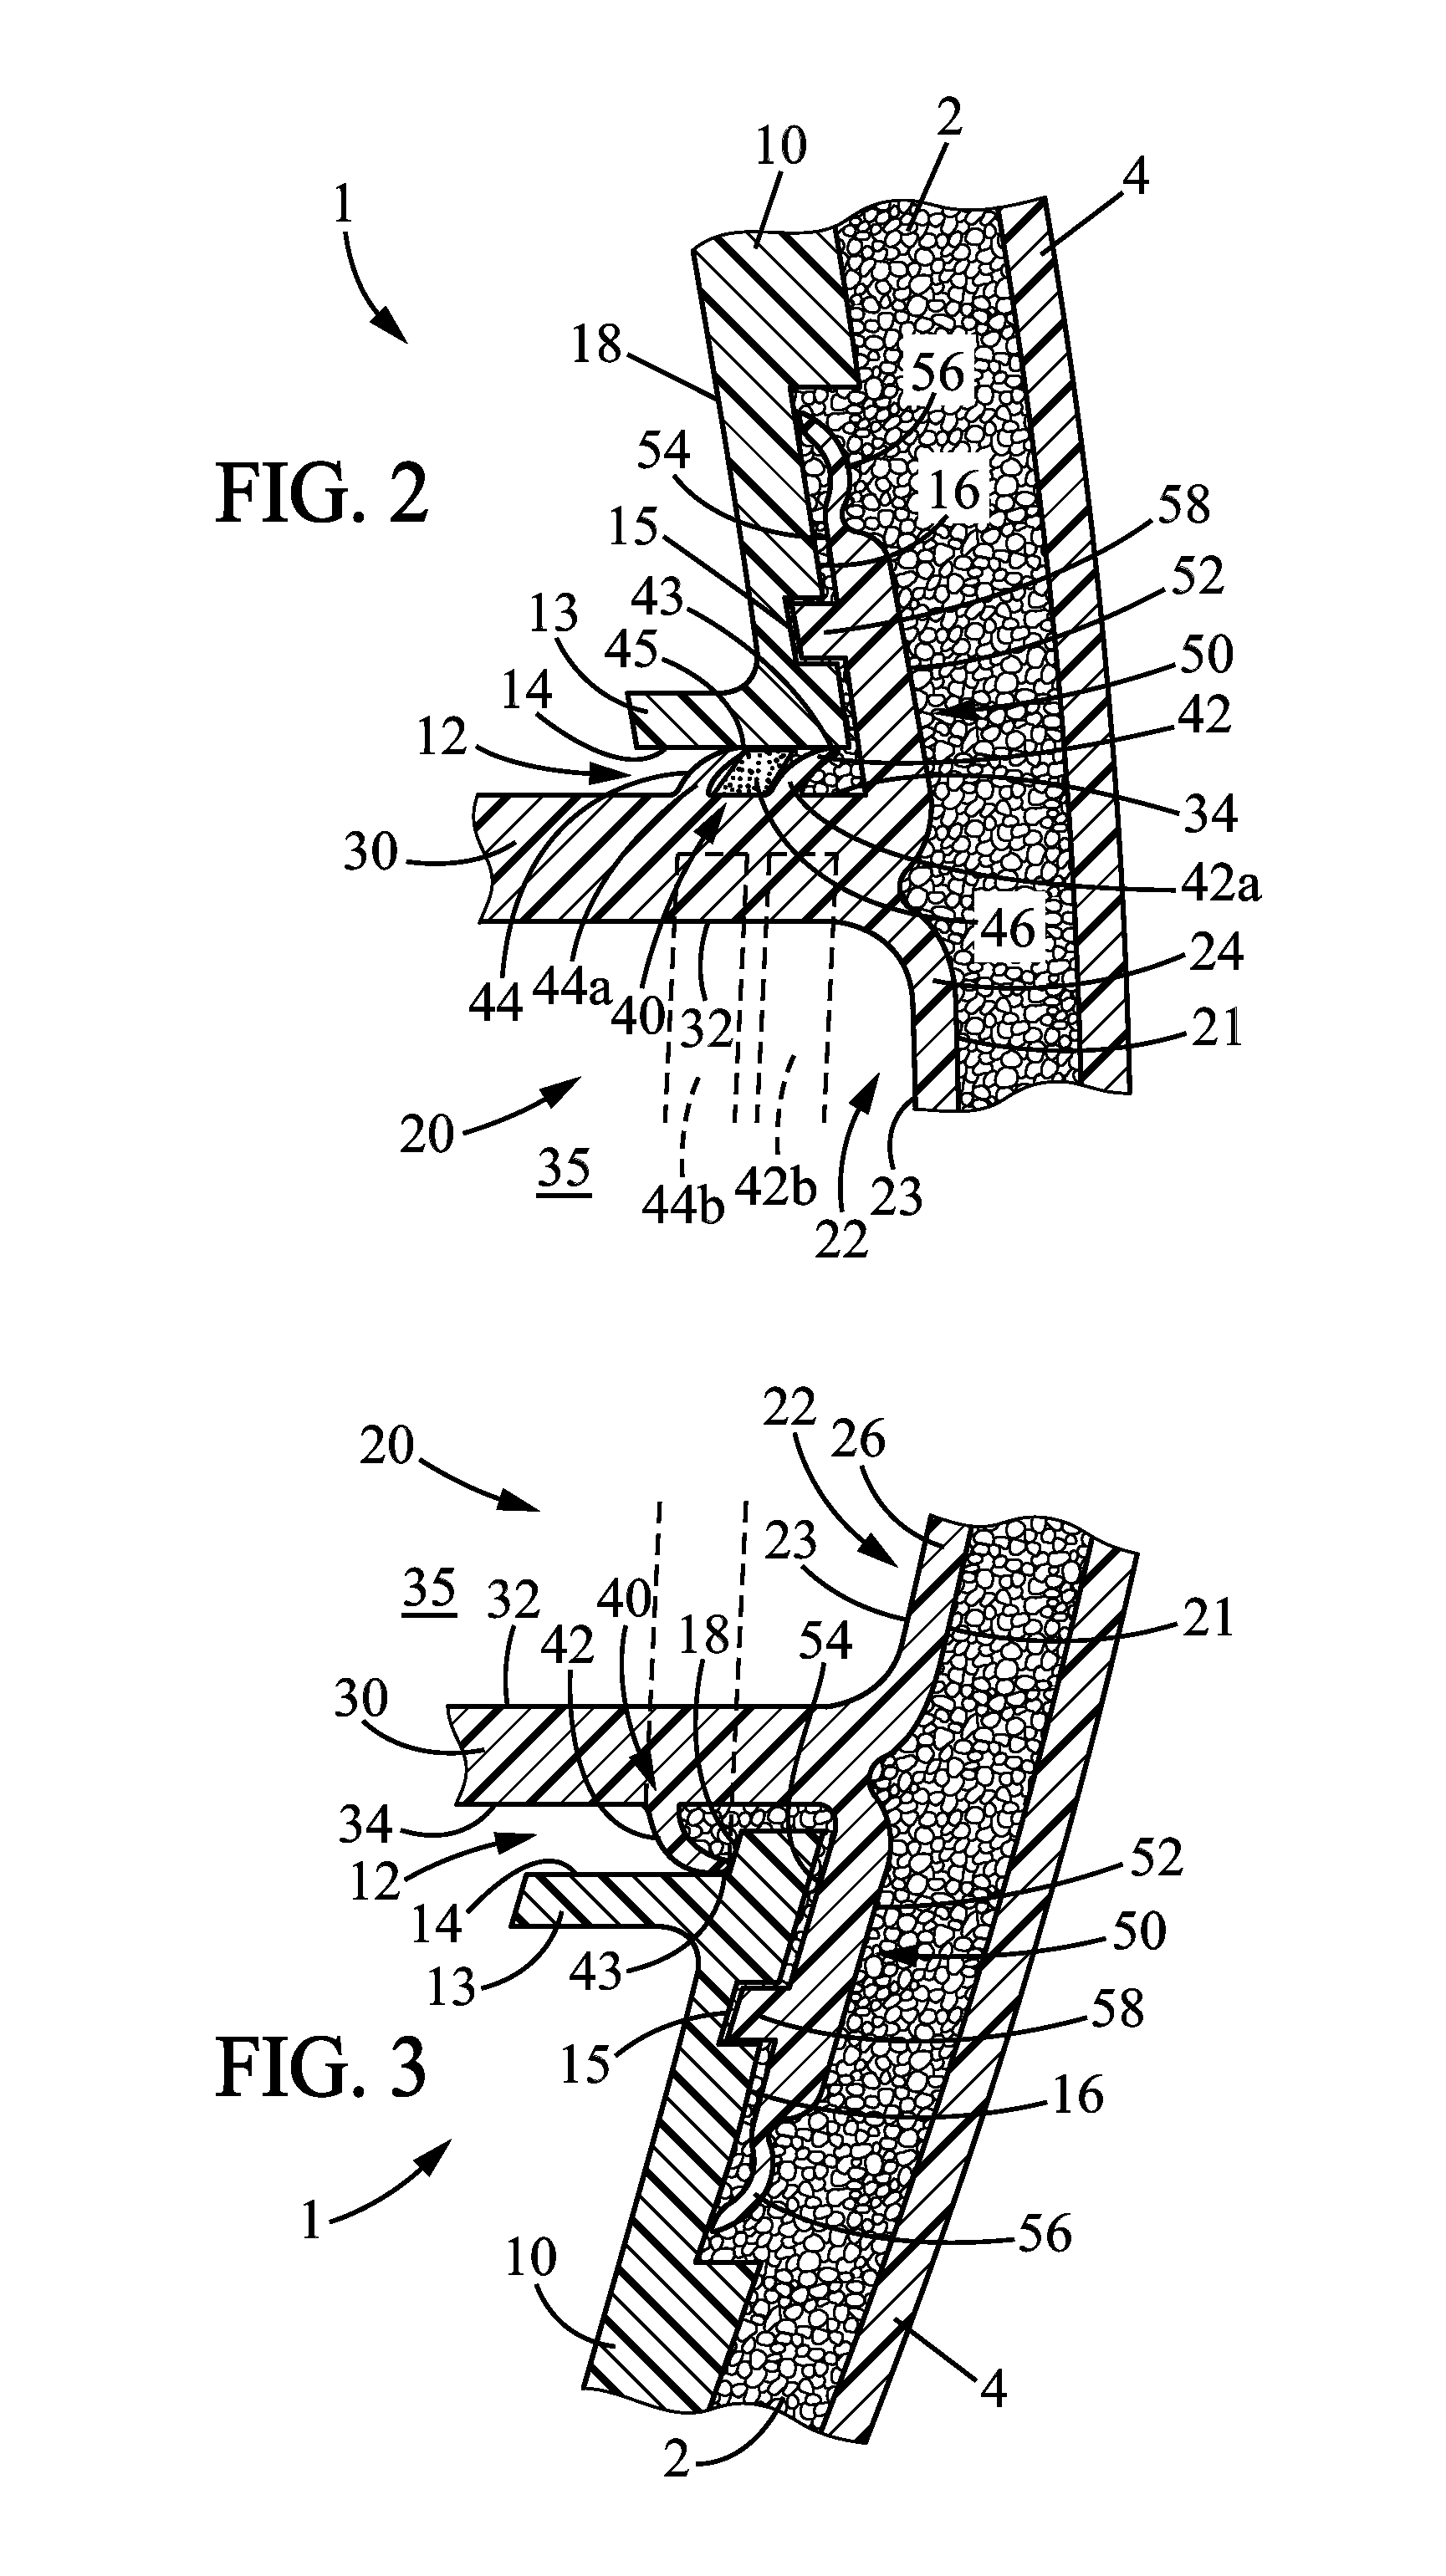 Interior trim part for a motor vehicle comprising an airbag door